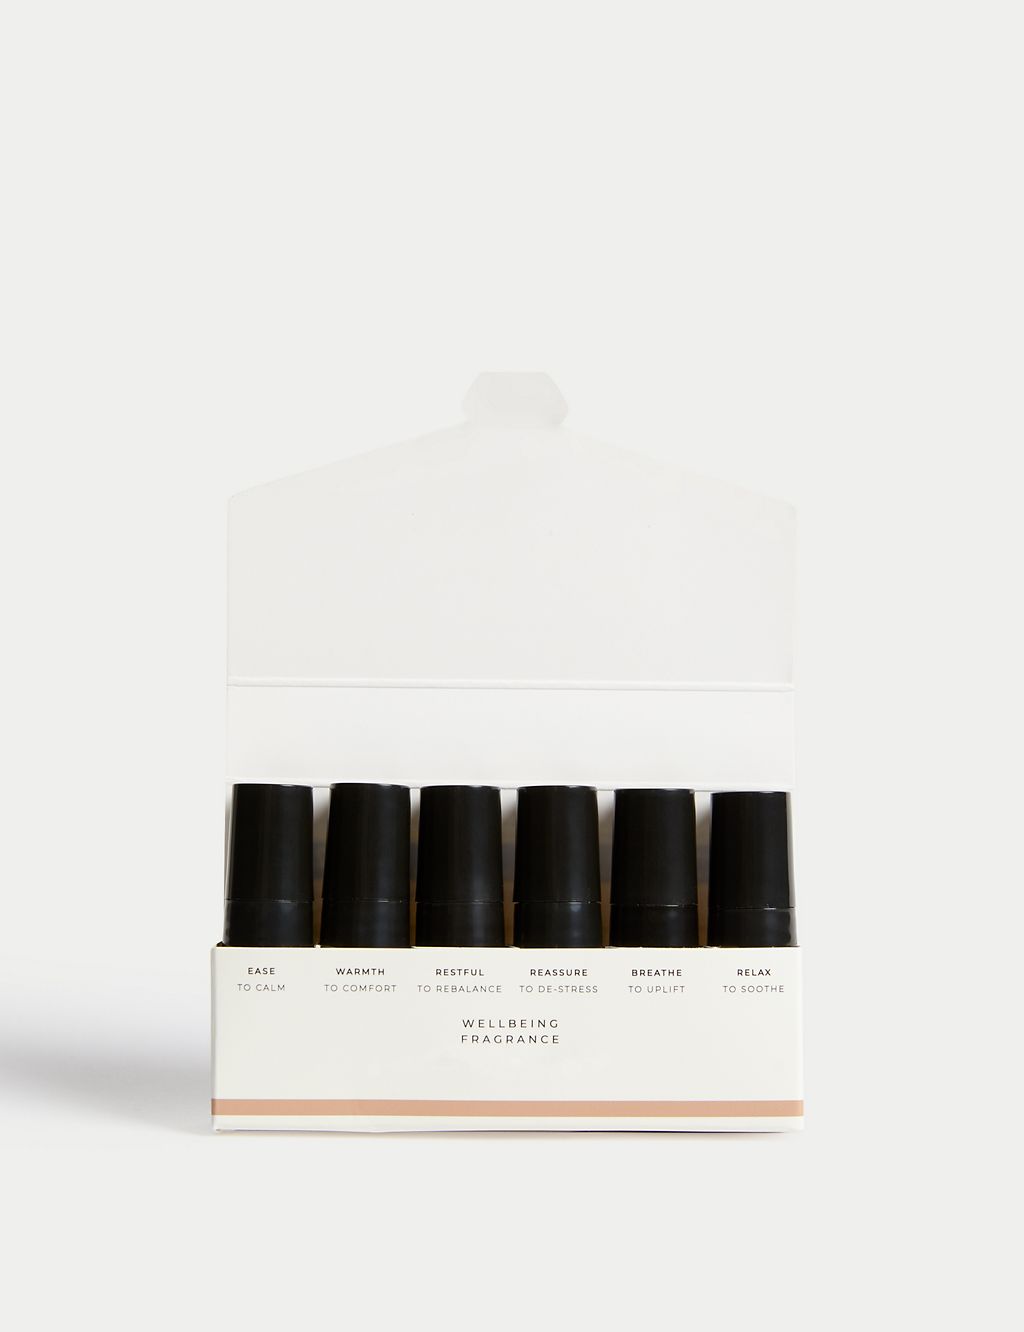 Apothecary Perfume Discovery Set 2 of 4